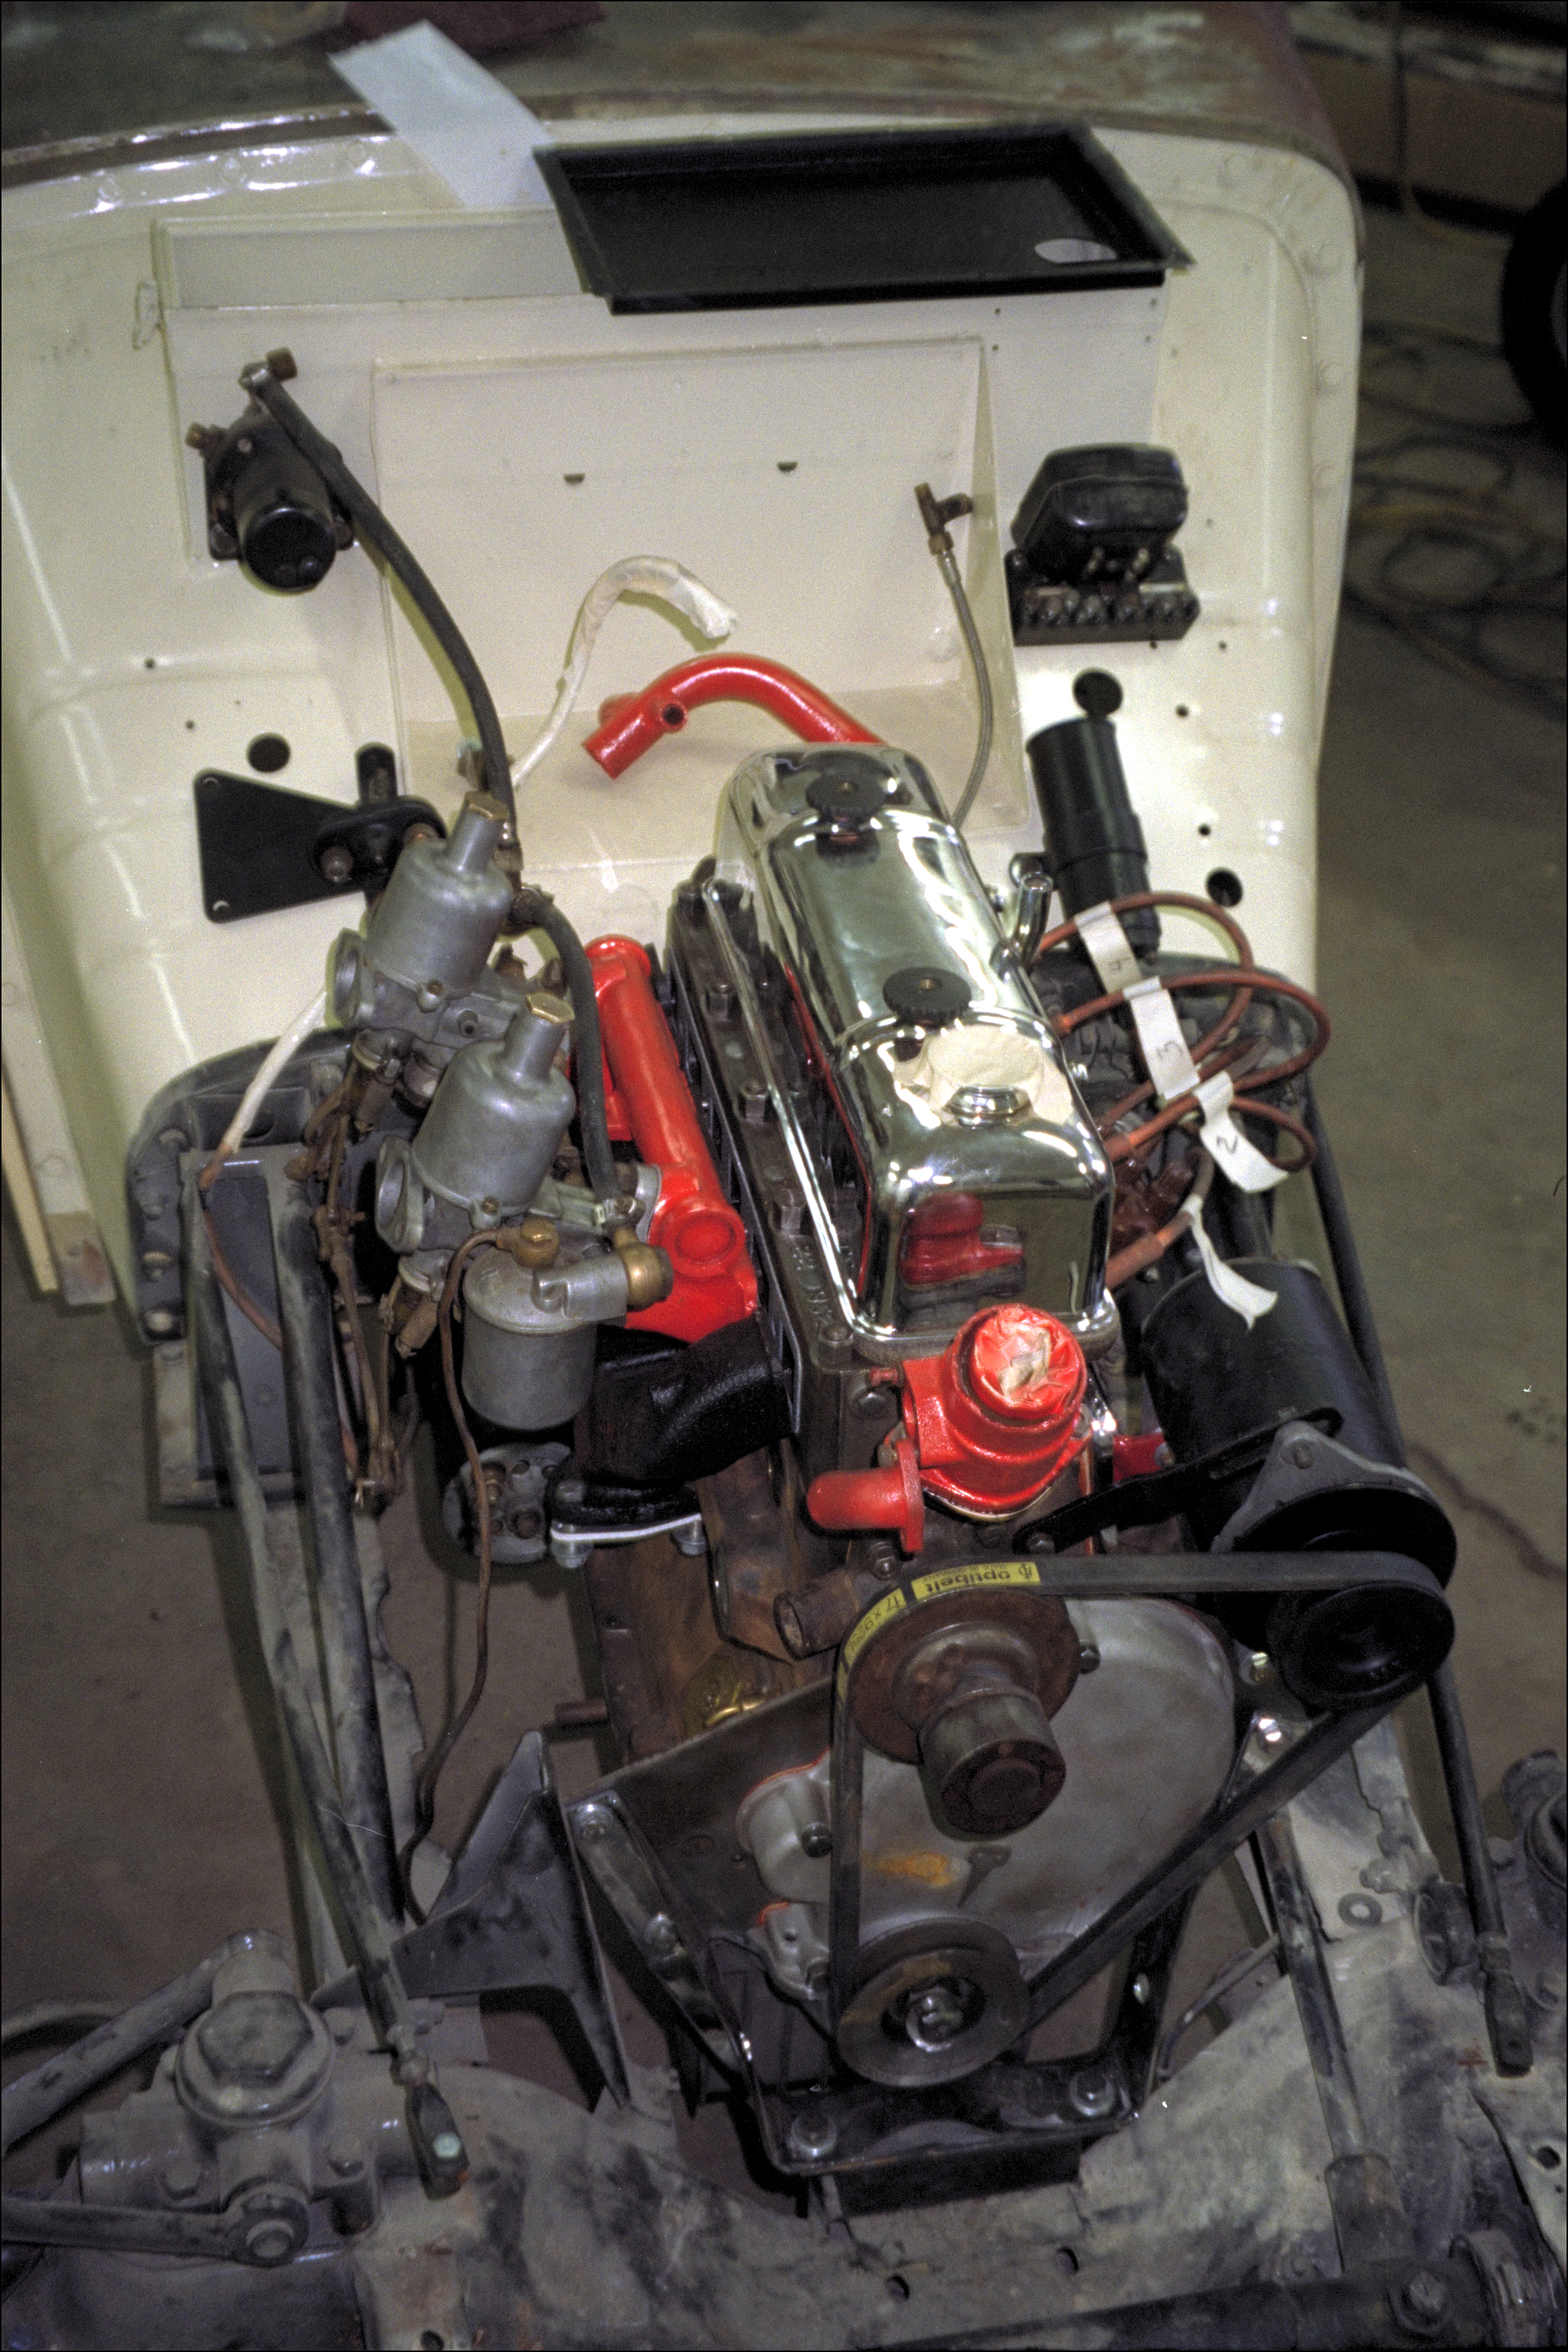 Top view of installed engine